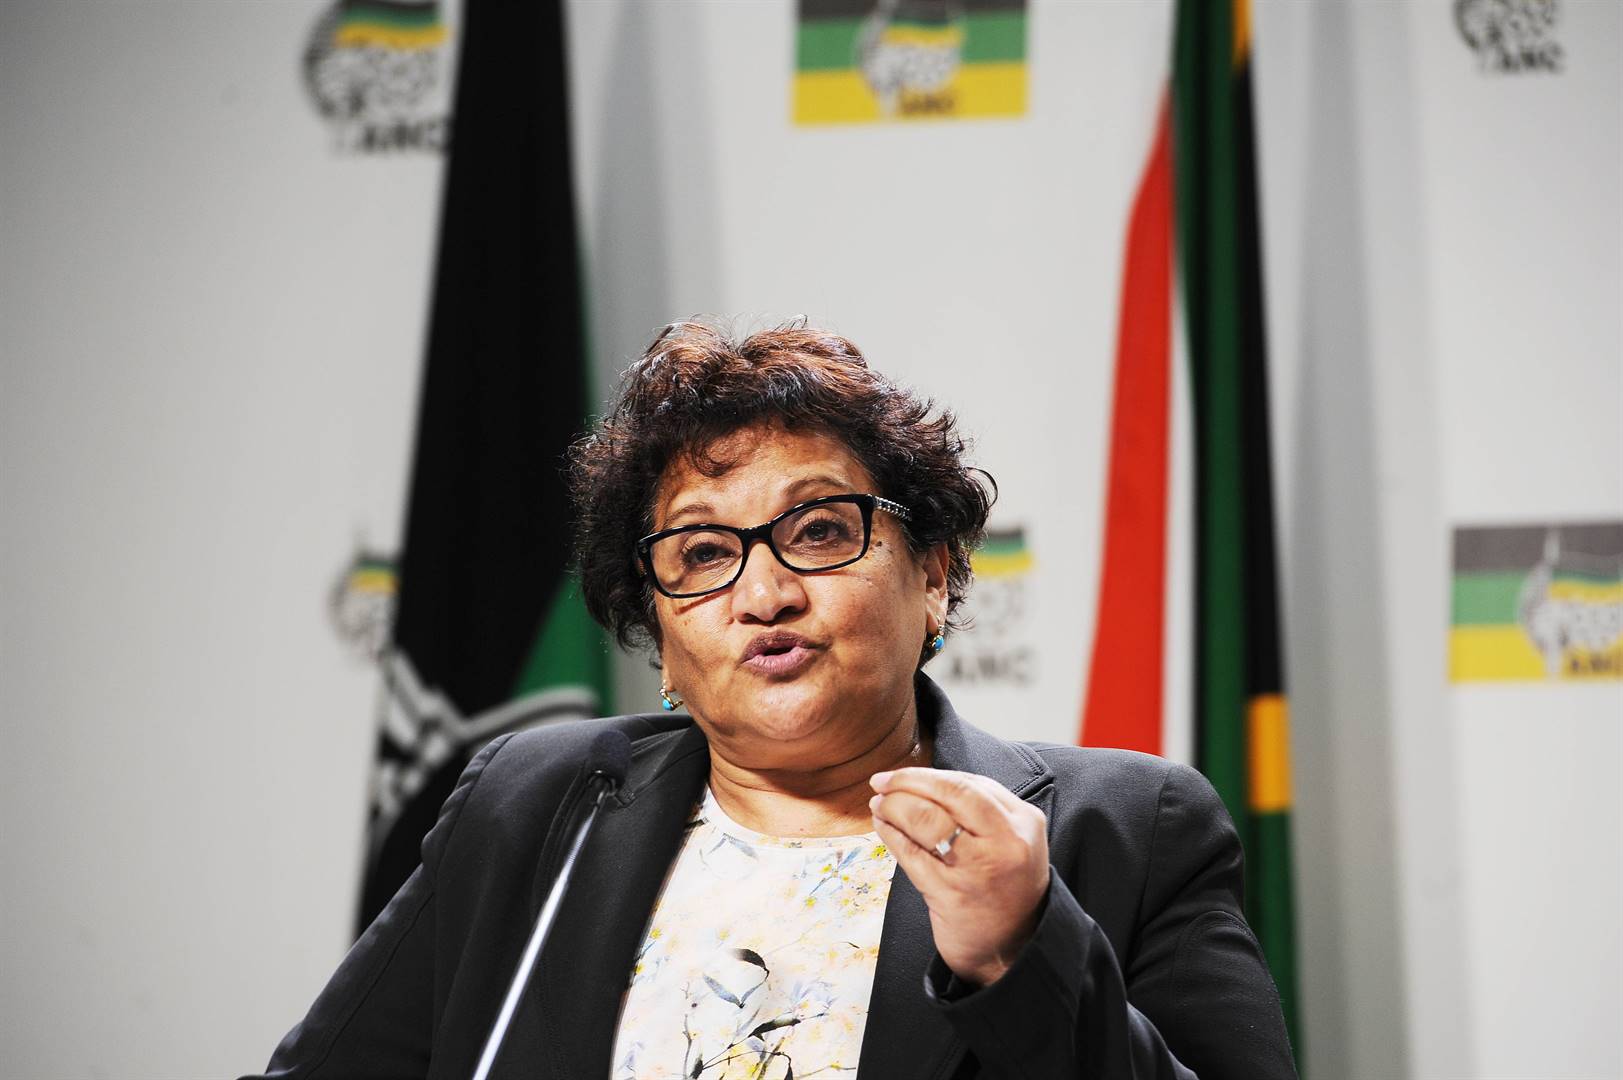 Duarte explained that it was important to ensure that councillors are able to identify struggles faced by those communities and to lobby for changes to be made in local government. Photo: File